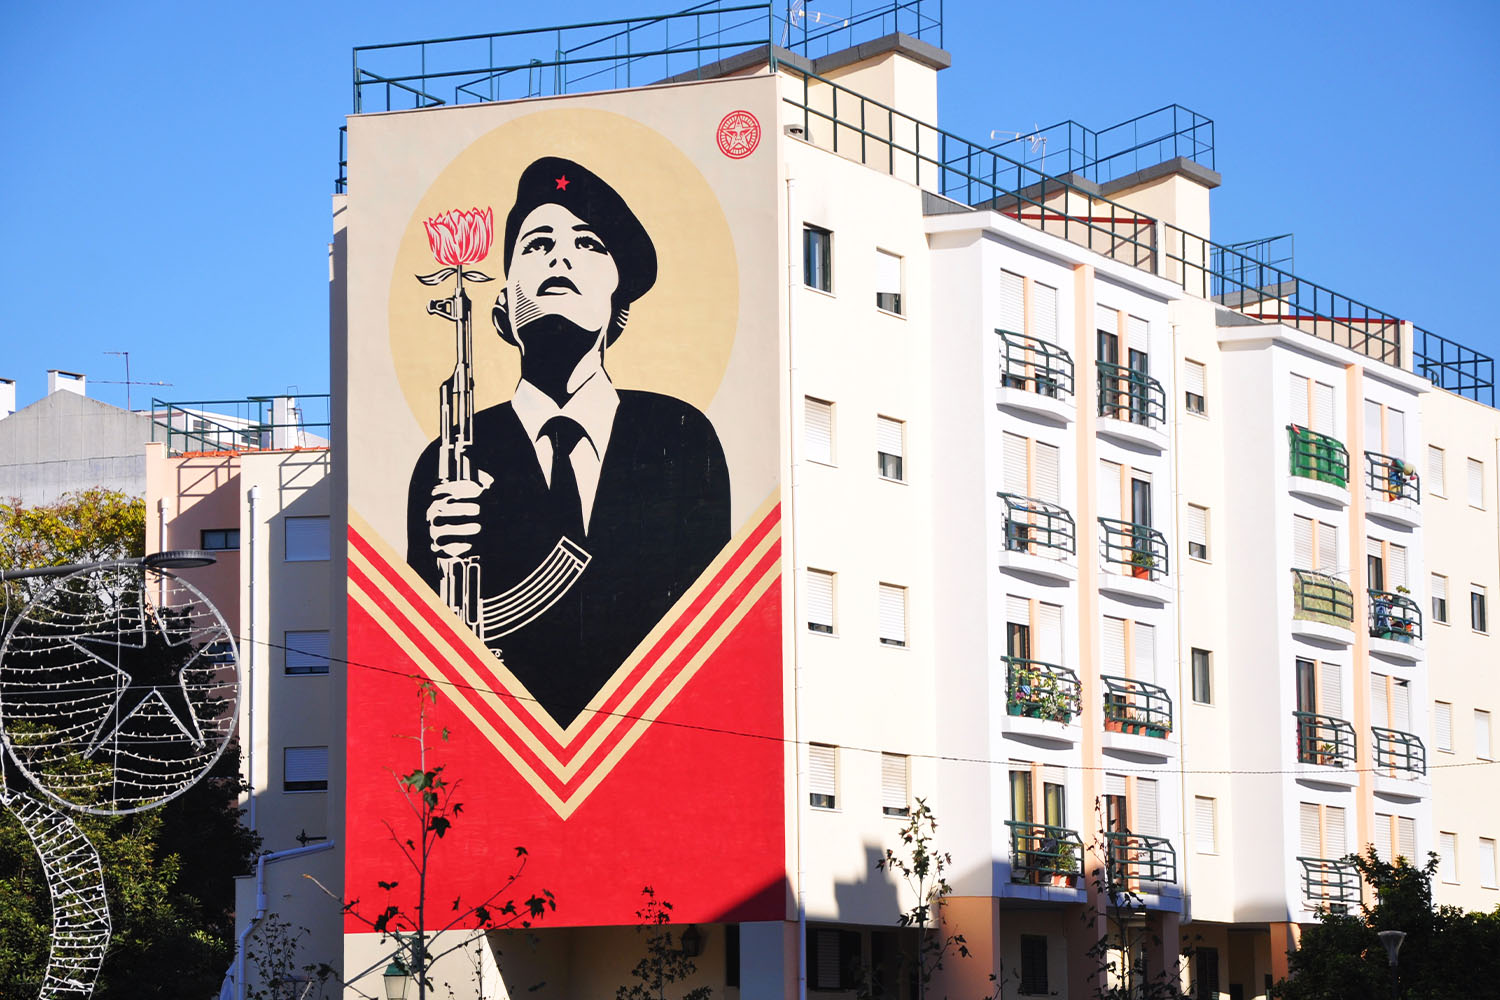 Shepard Fairey's mural of a woman wearing a revolutionary beret and holding a rifle with a carnation in the muzzle in Lisbon, Portugal